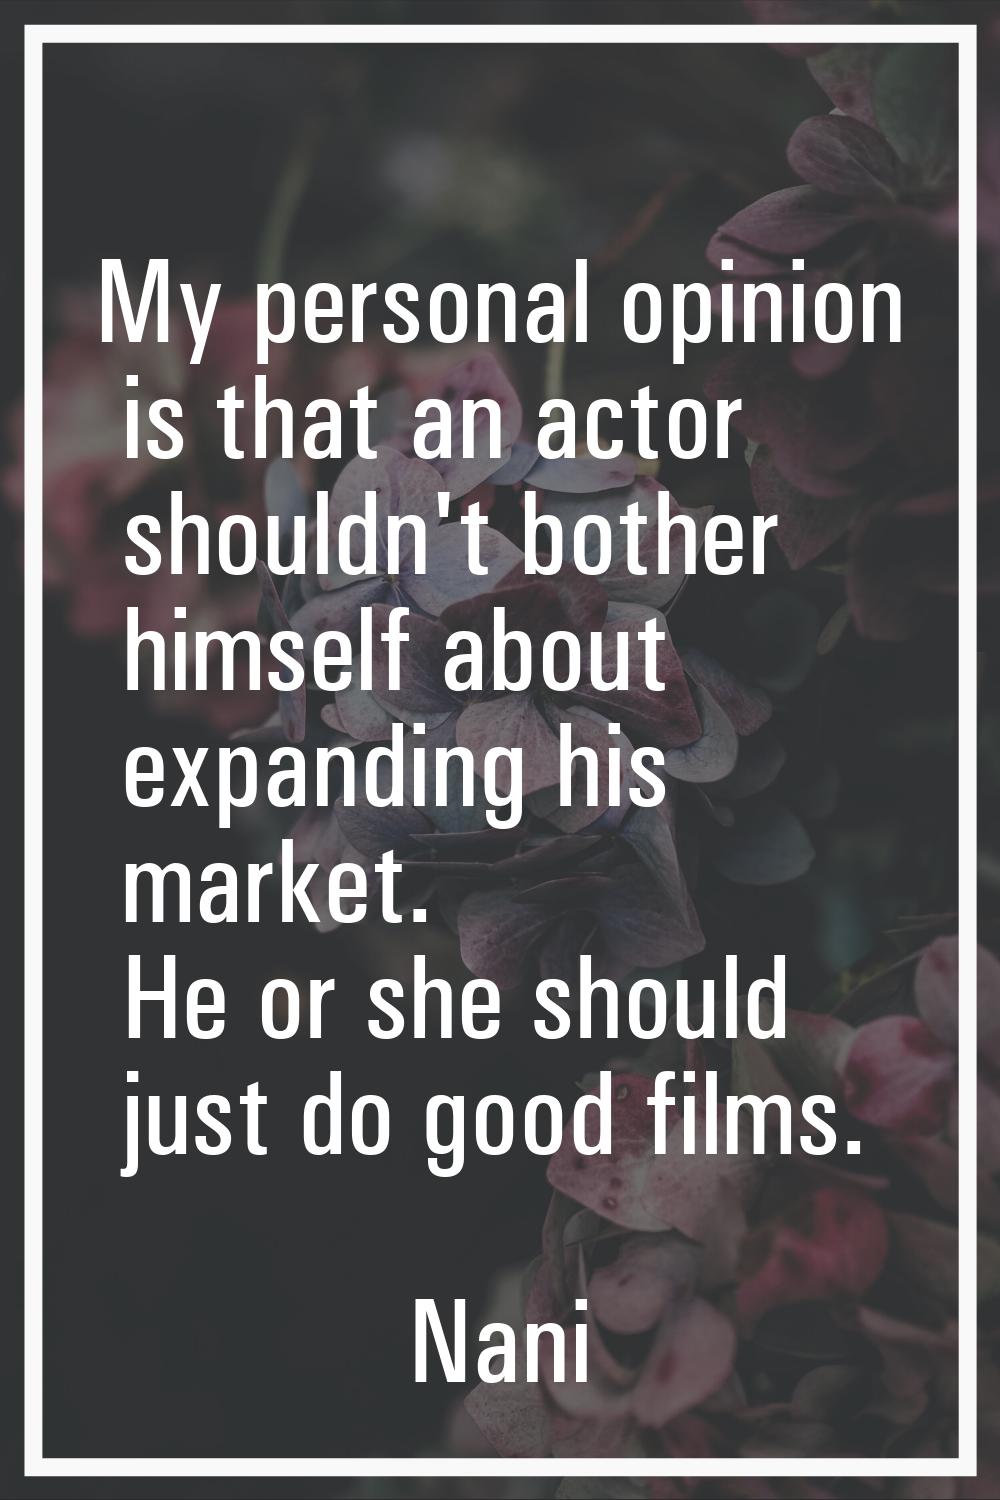 My personal opinion is that an actor shouldn't bother himself about expanding his market. He or she